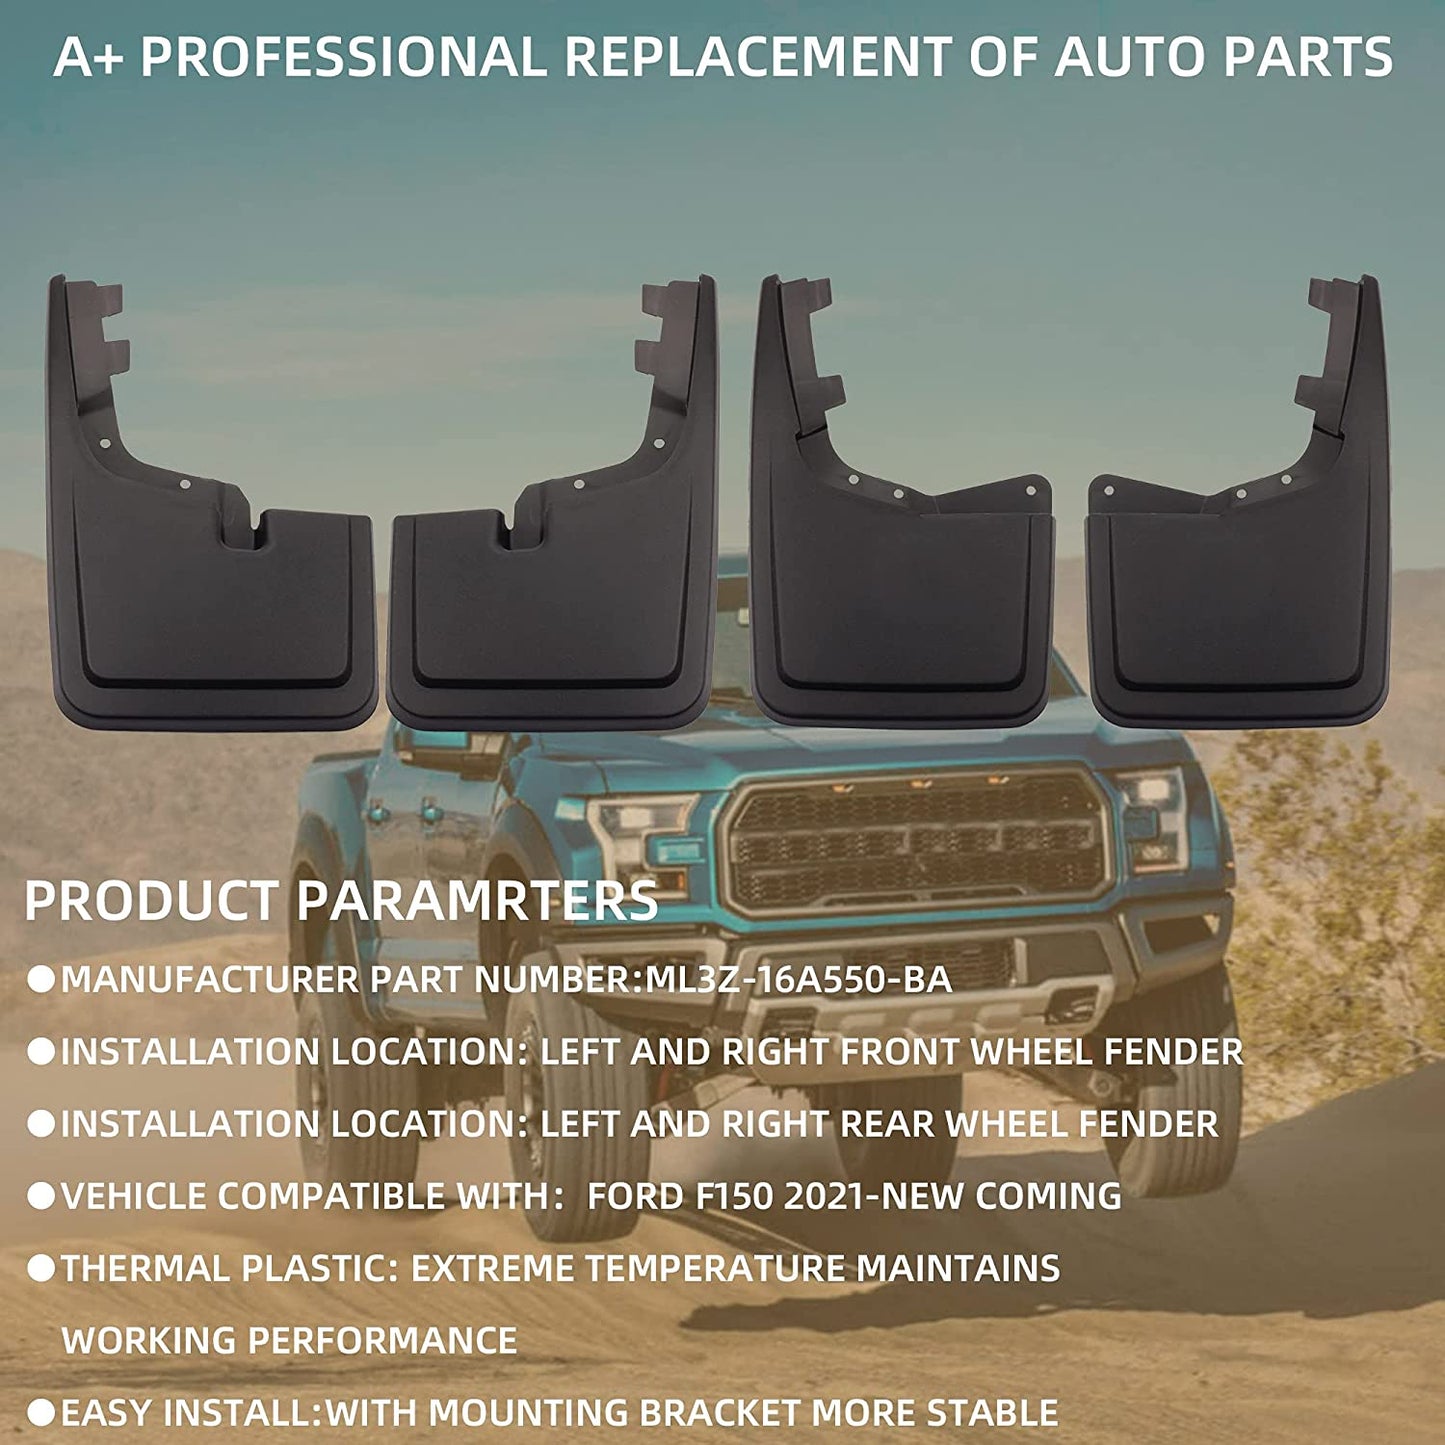 Mud Flaps Guard Fender Compitable with Ford F150 2020-New Coming - Dasbecan